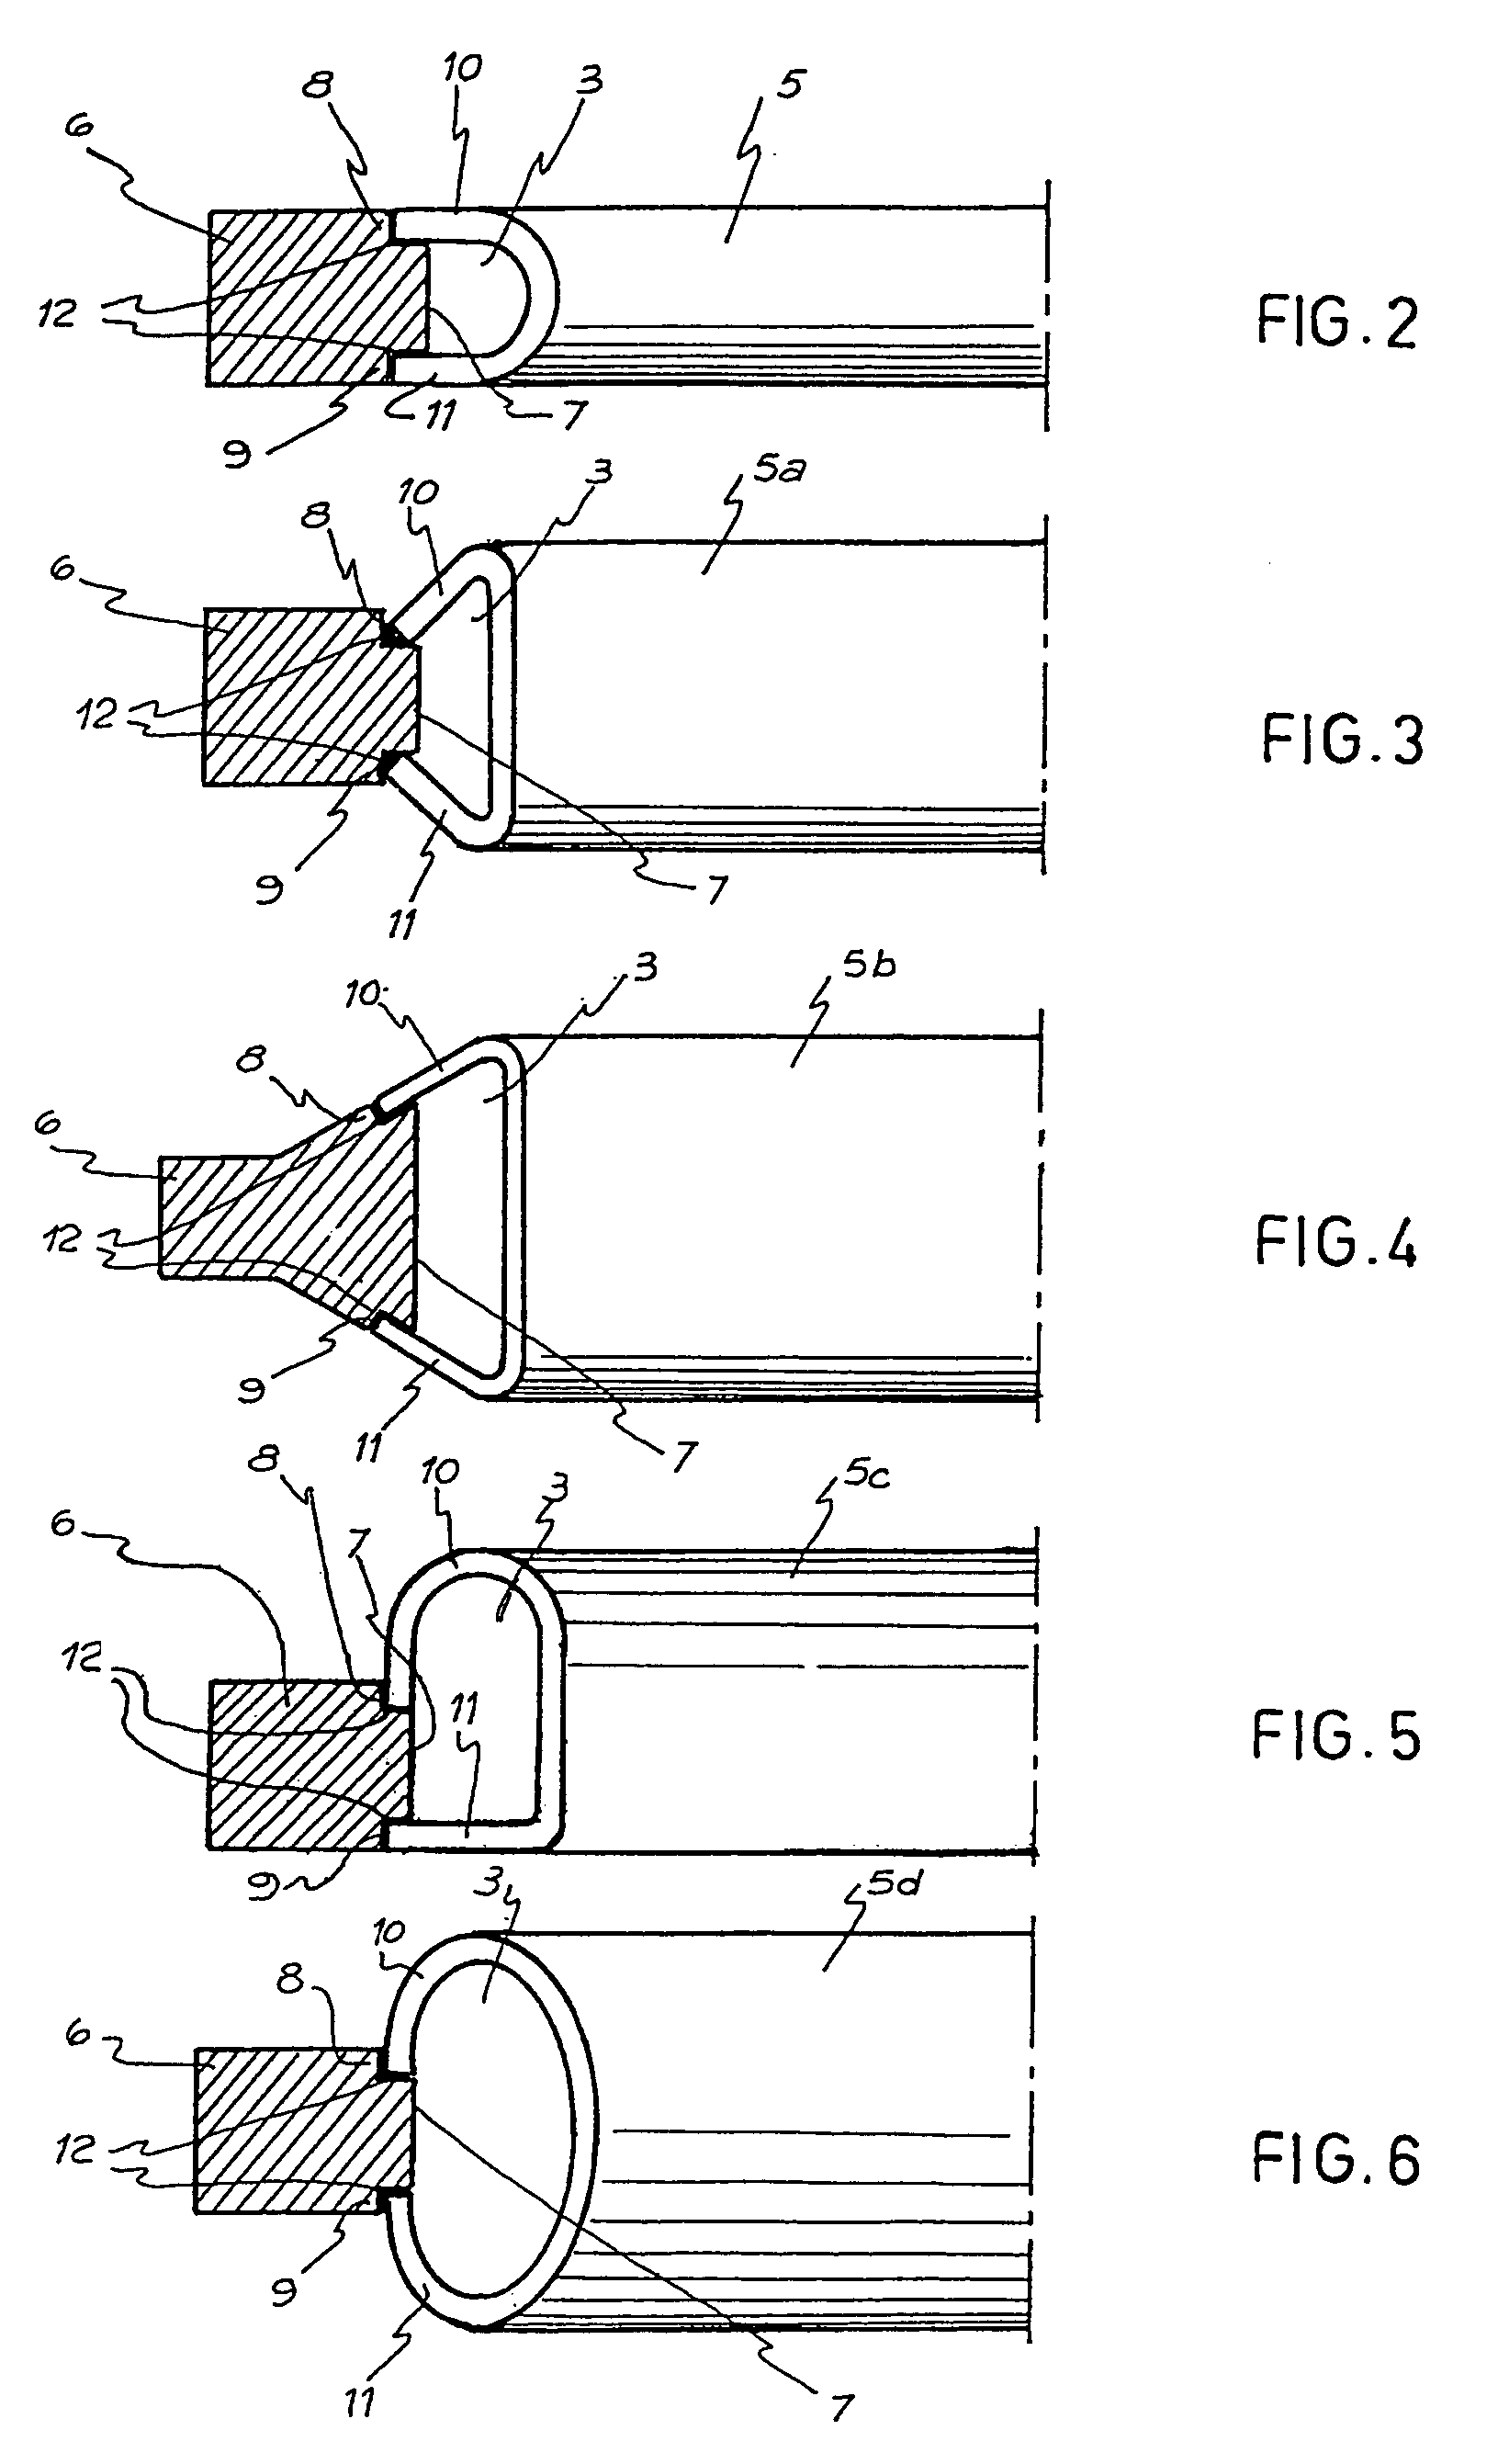 Method of mounting a metal sheet ring assembled and welded in a carrier hoop to conform the annular cooling tube of a piston of internal combustion engine